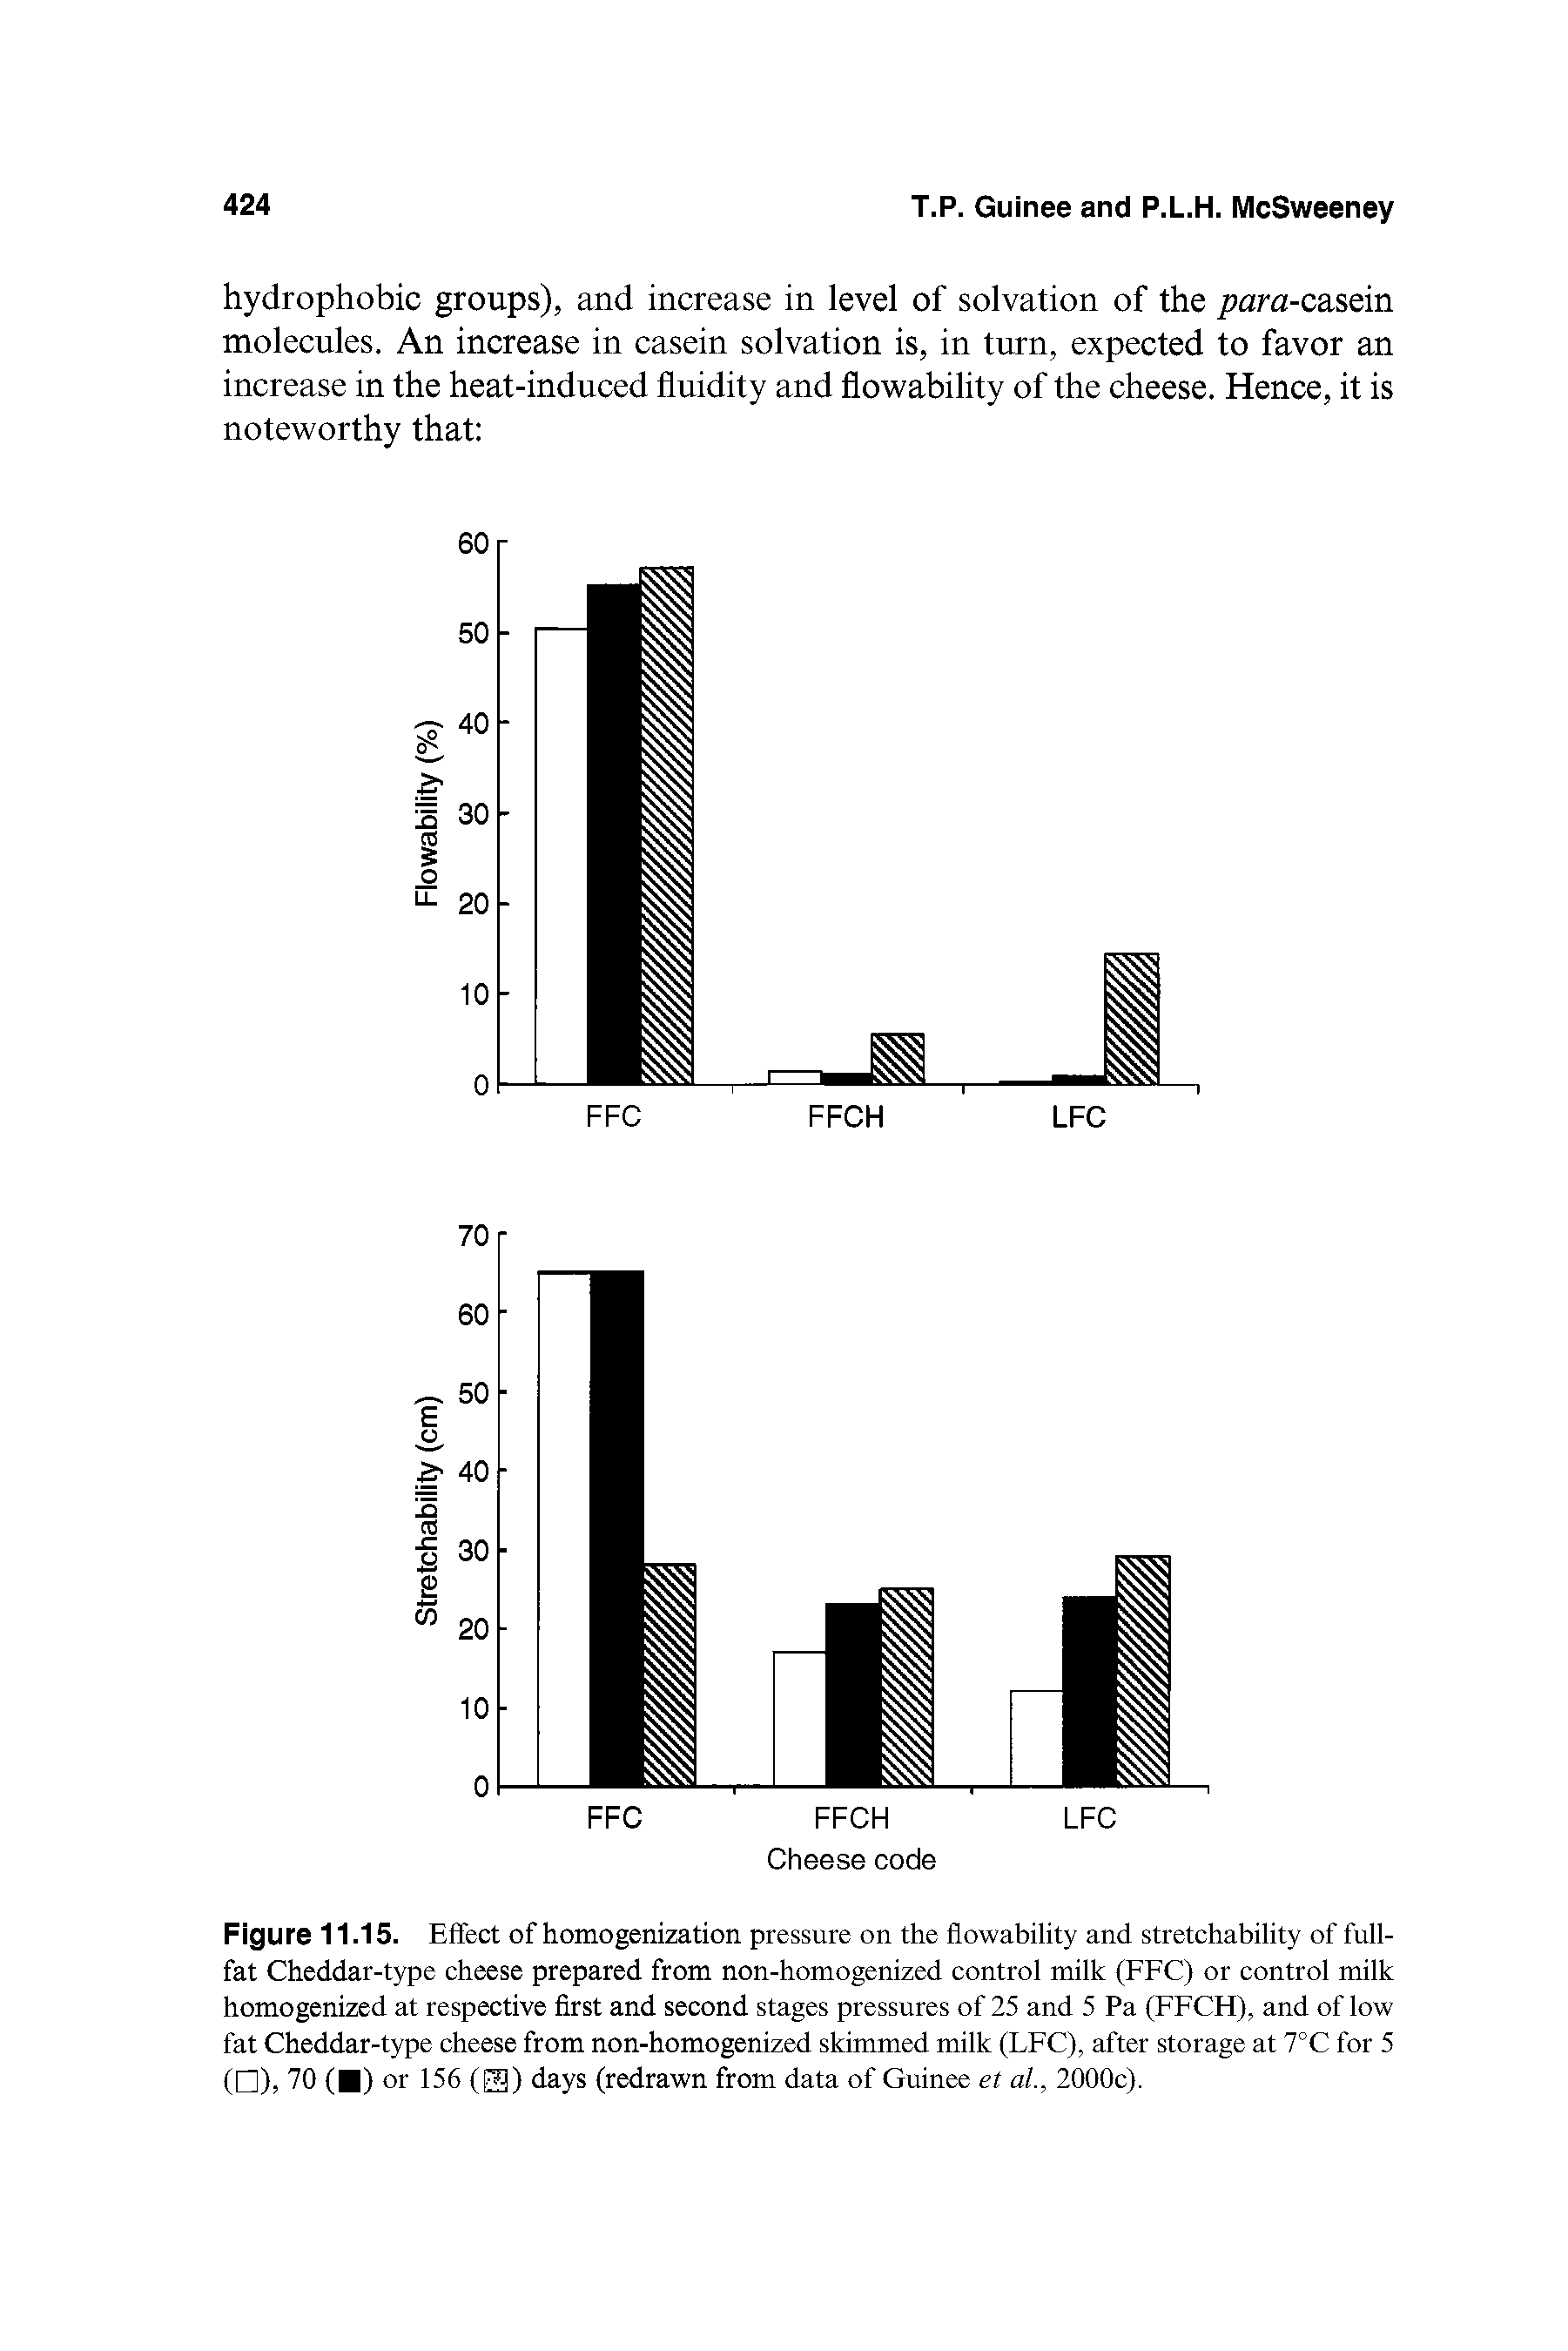 Figure 11.15. Effect of homogenization pressure on the flowability and stretchability of full-fat Cheddar-type cheese prepared from non-homogenized control milk (FFC) or control milk homogenized at respective first and second stages pressures of 25 and 5 Pa (FFCH), and of low fat Cheddar-type cheese from non-homogenized skimmed milk (LFC), after storage at 7°C for 5 ( ), 70 ( ) or 156 ) days (redrawn from data of Guinee et al., 2000c).